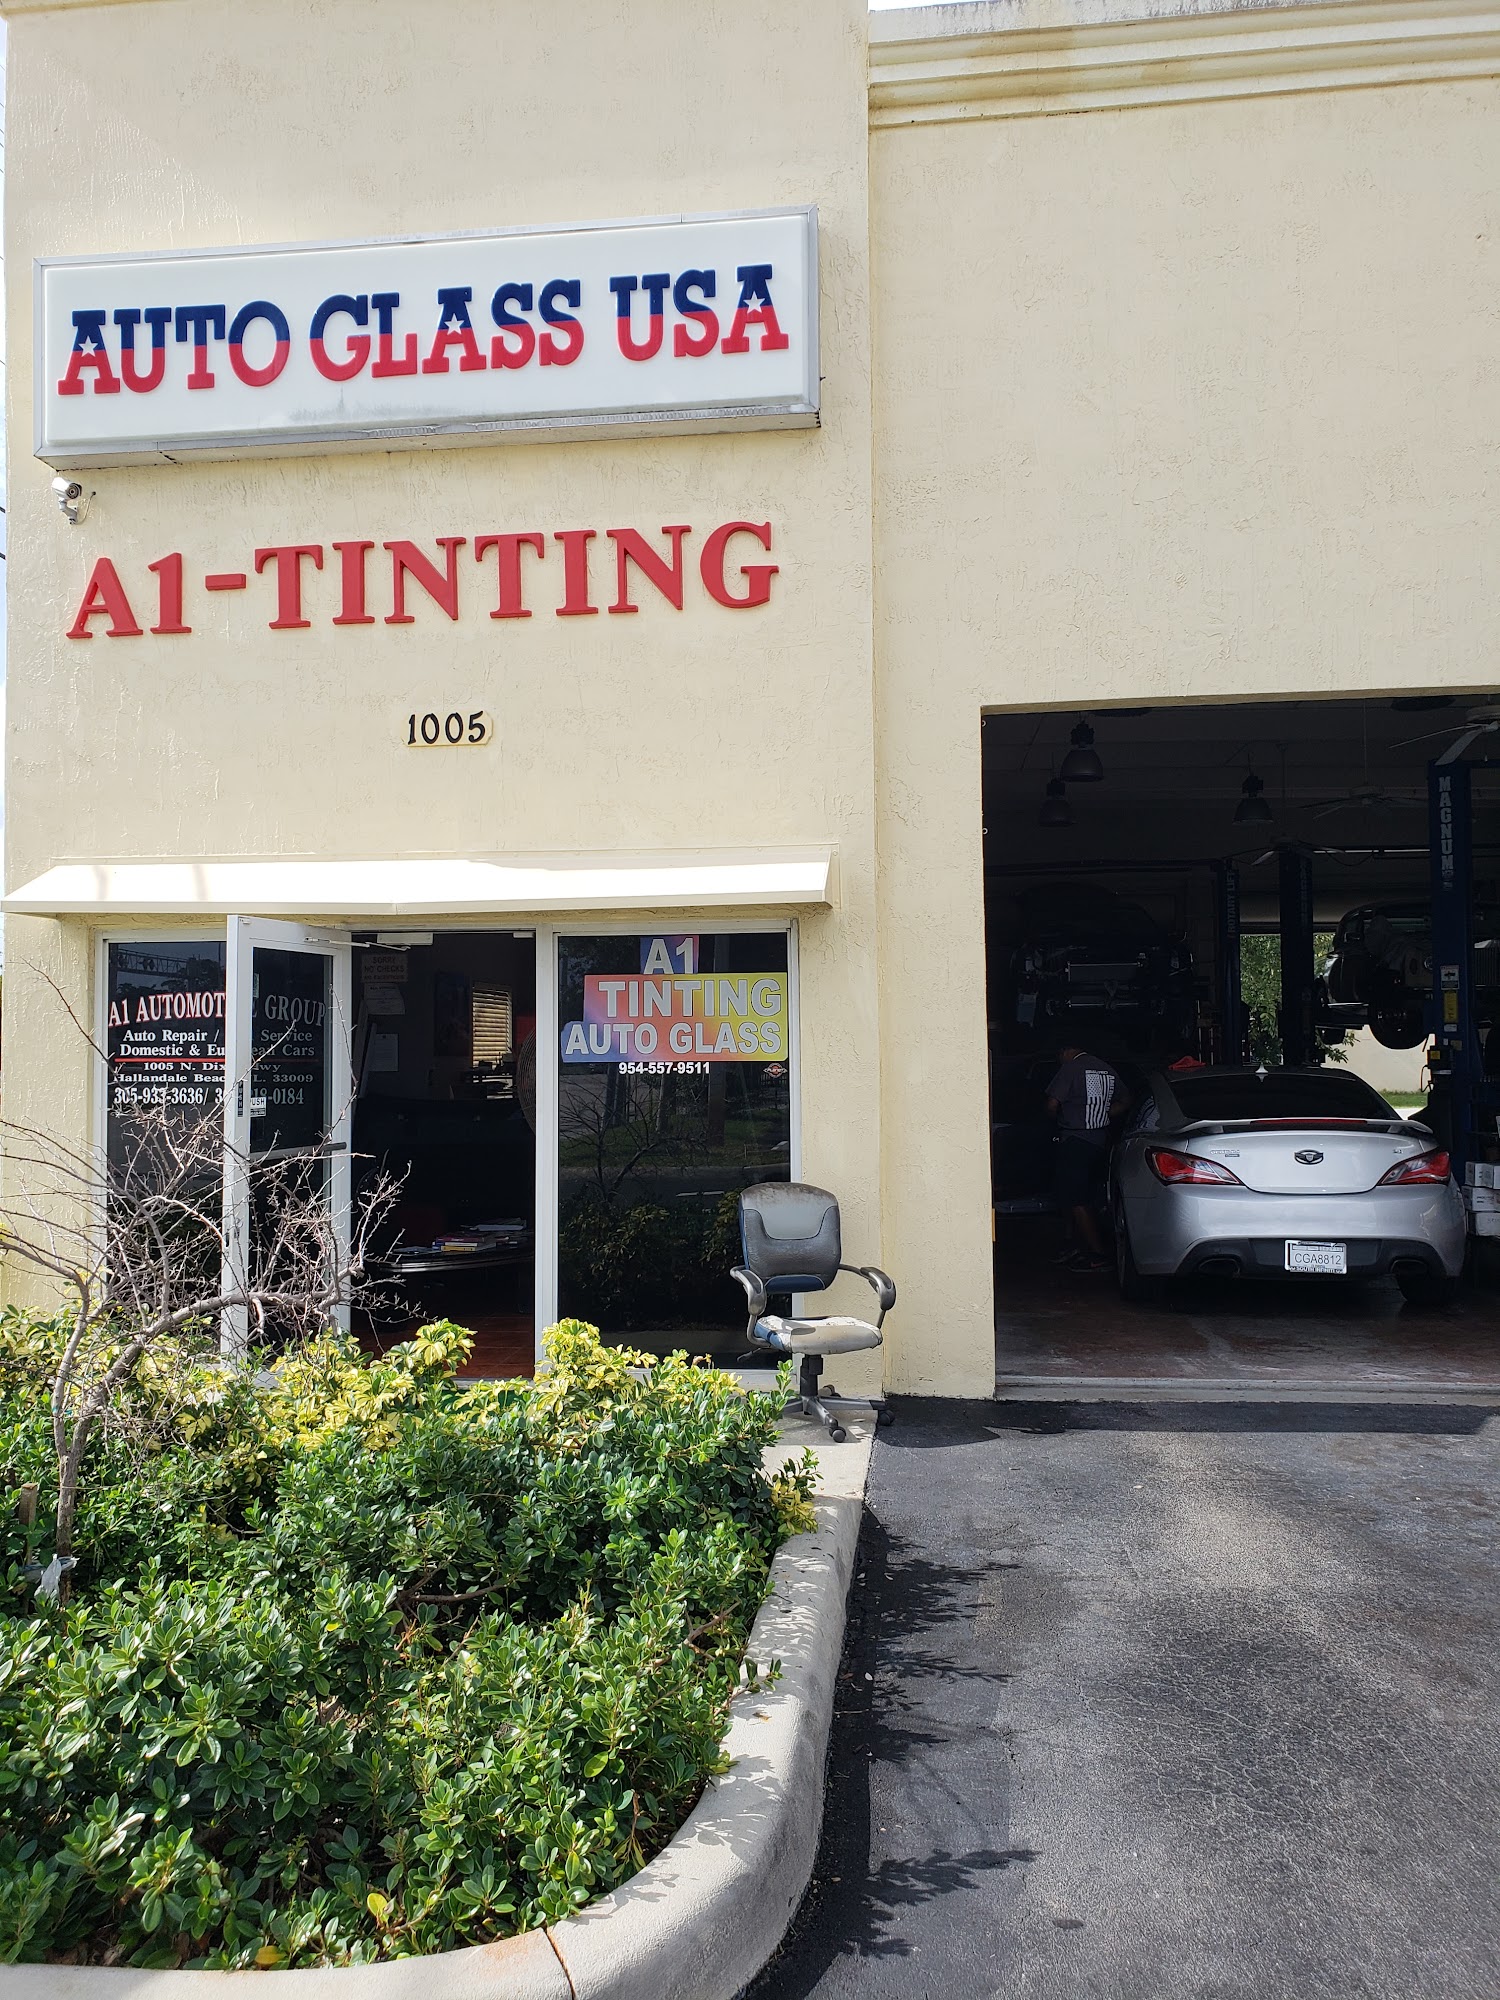 A-1 Tinting and autglass